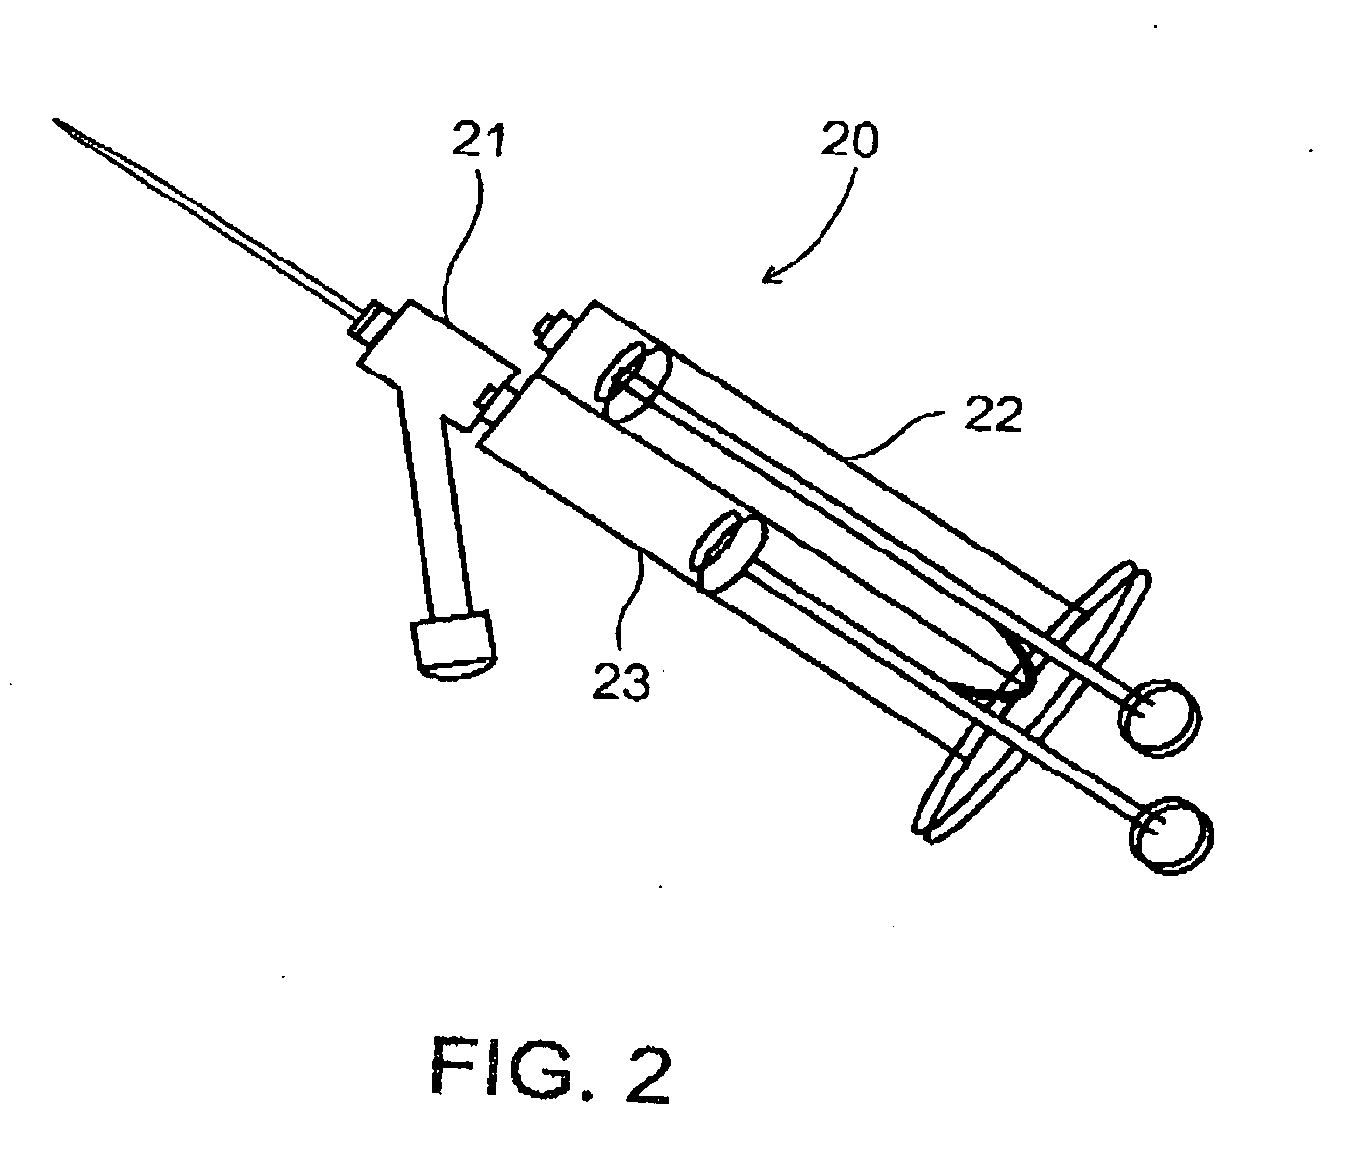 Apparatus and method for enabling perforating vein ablation